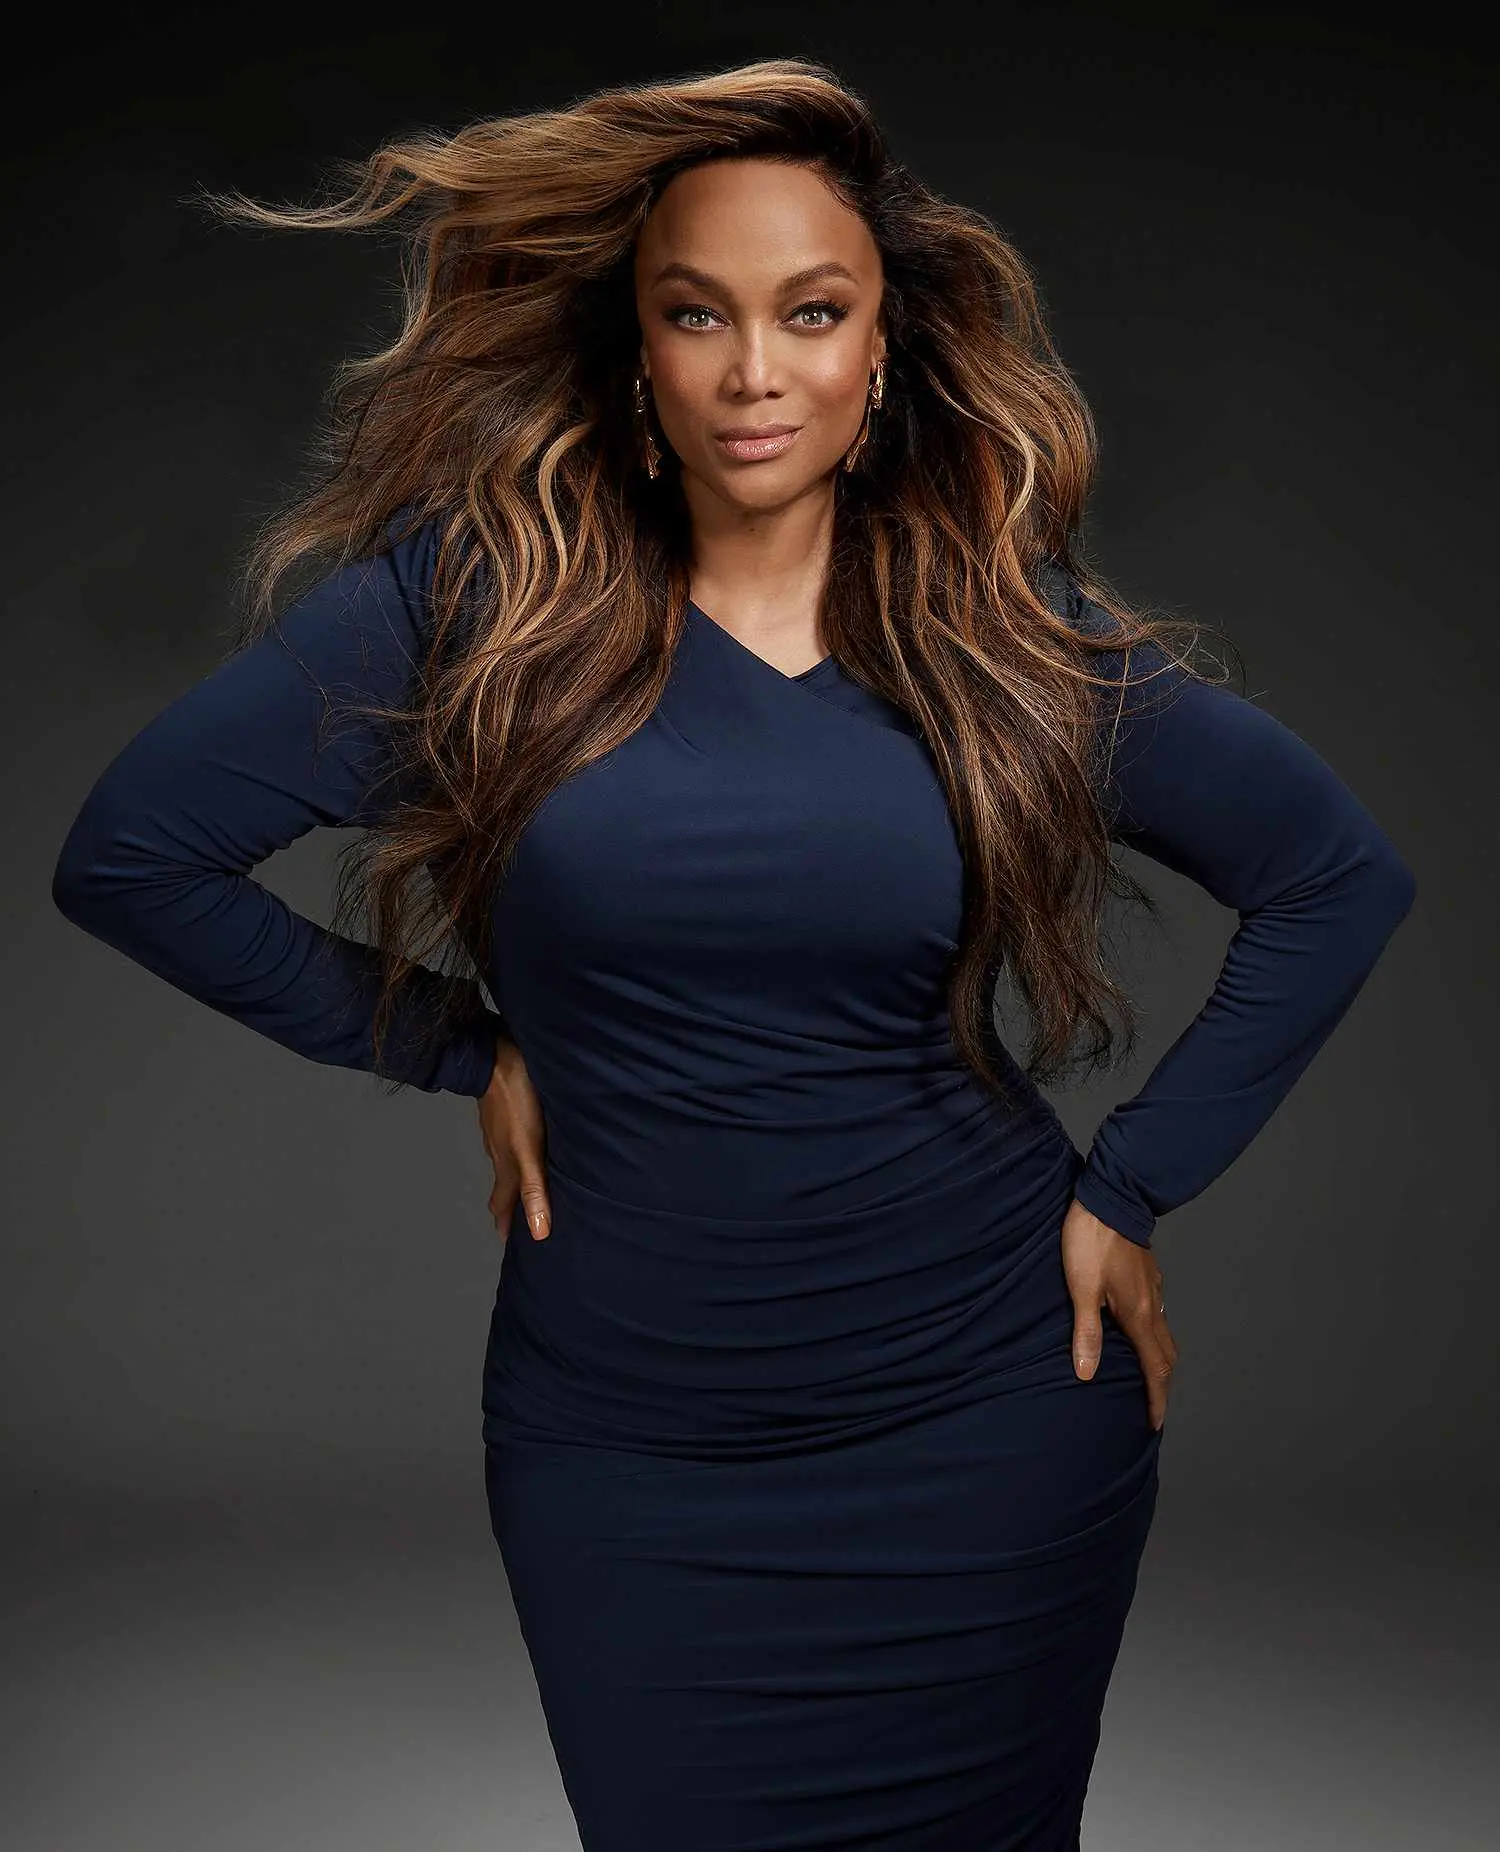 tyra-banks02-a673ee9953be4fe7802dd8dcc1a1f1c0